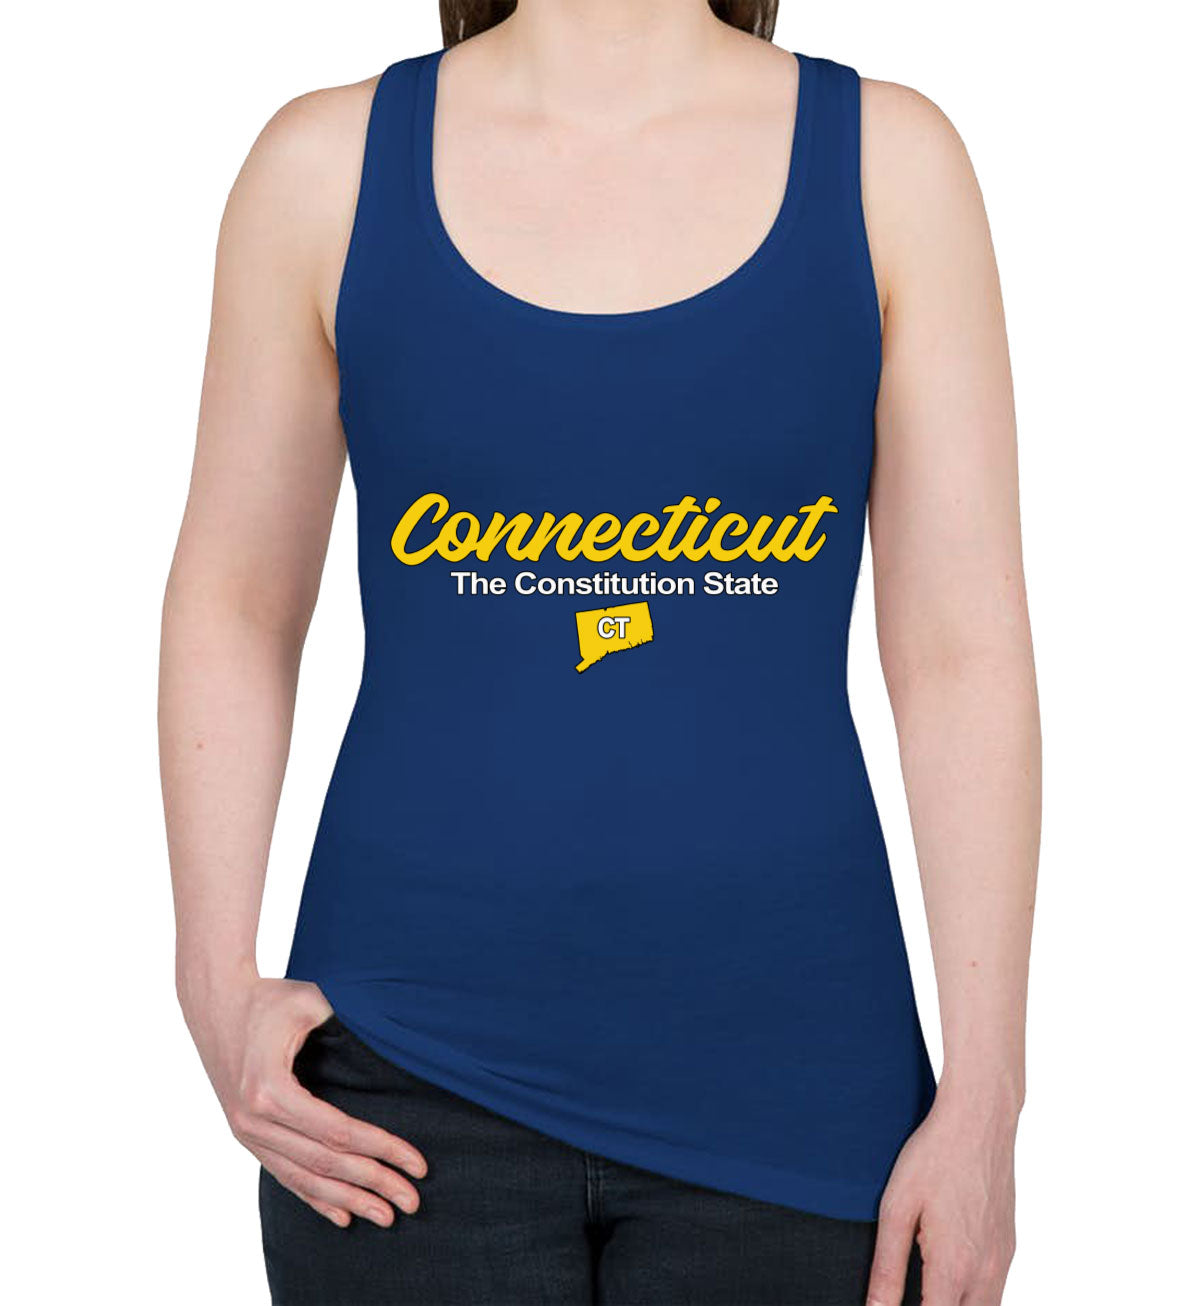 Connecticut The Constitution State Women's Racerback Tank Top